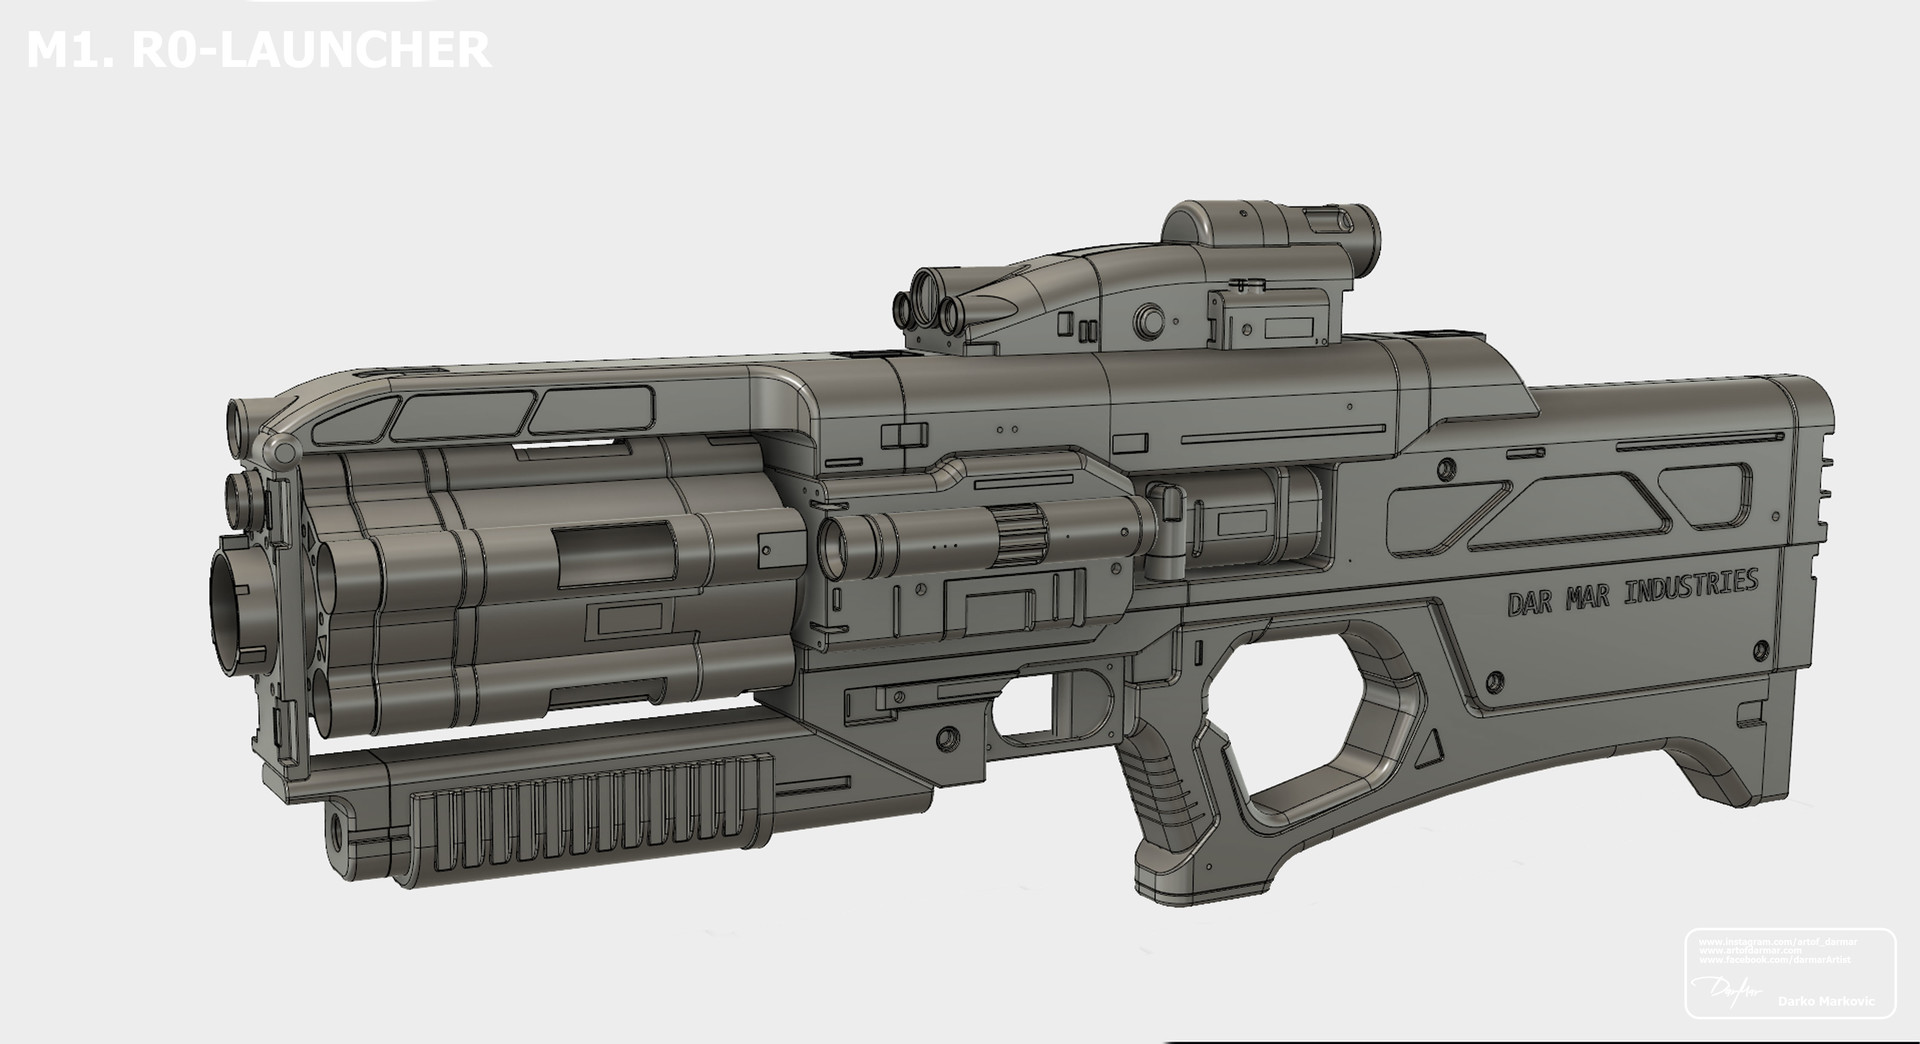 ArtStation - M1. R0-LAUNCHER from the upcoming SCFI Book story